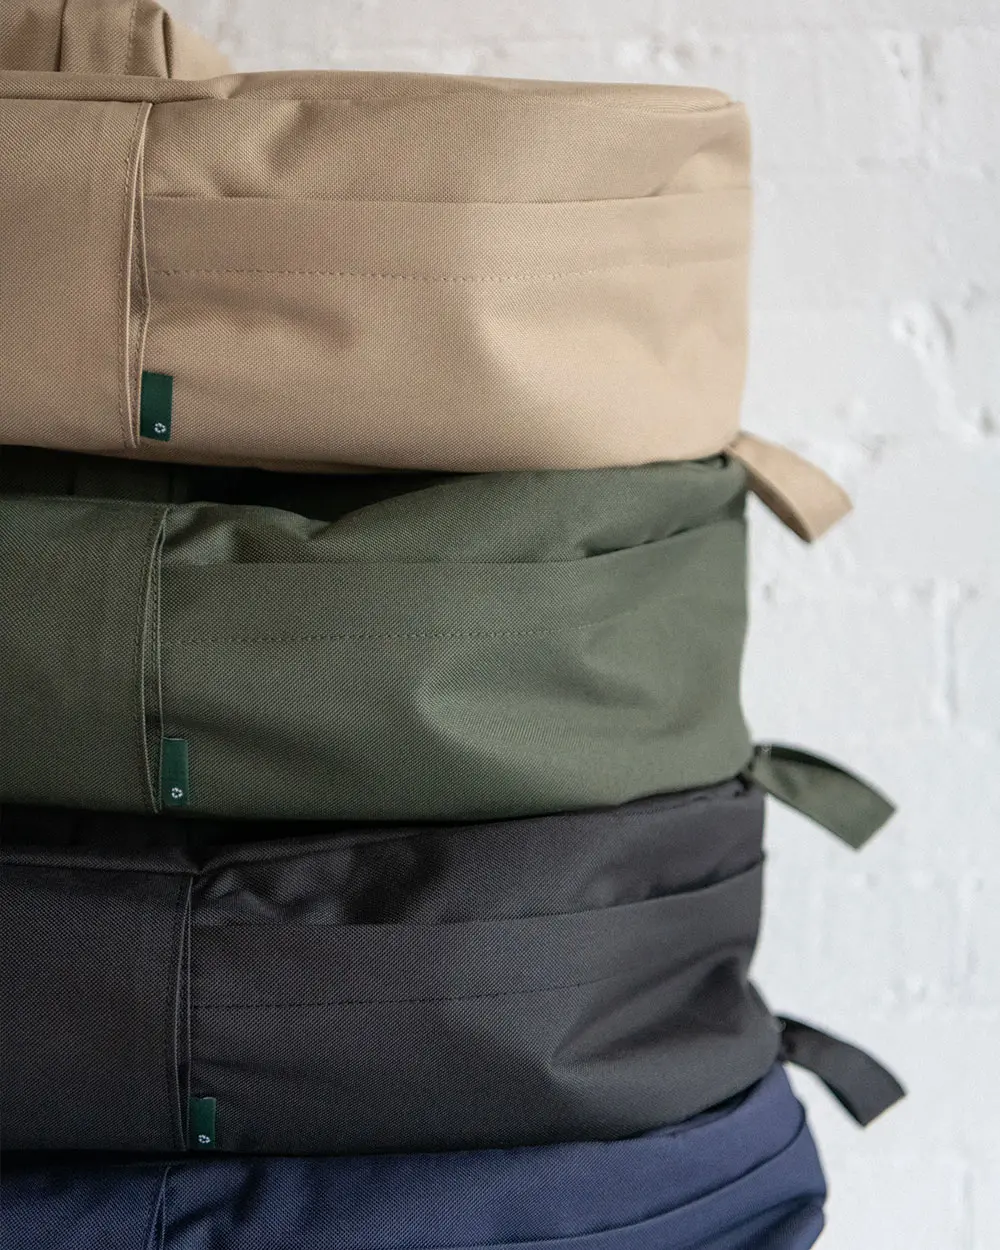 Herschel Redesigns Core Line to be More Sustainable – WWD